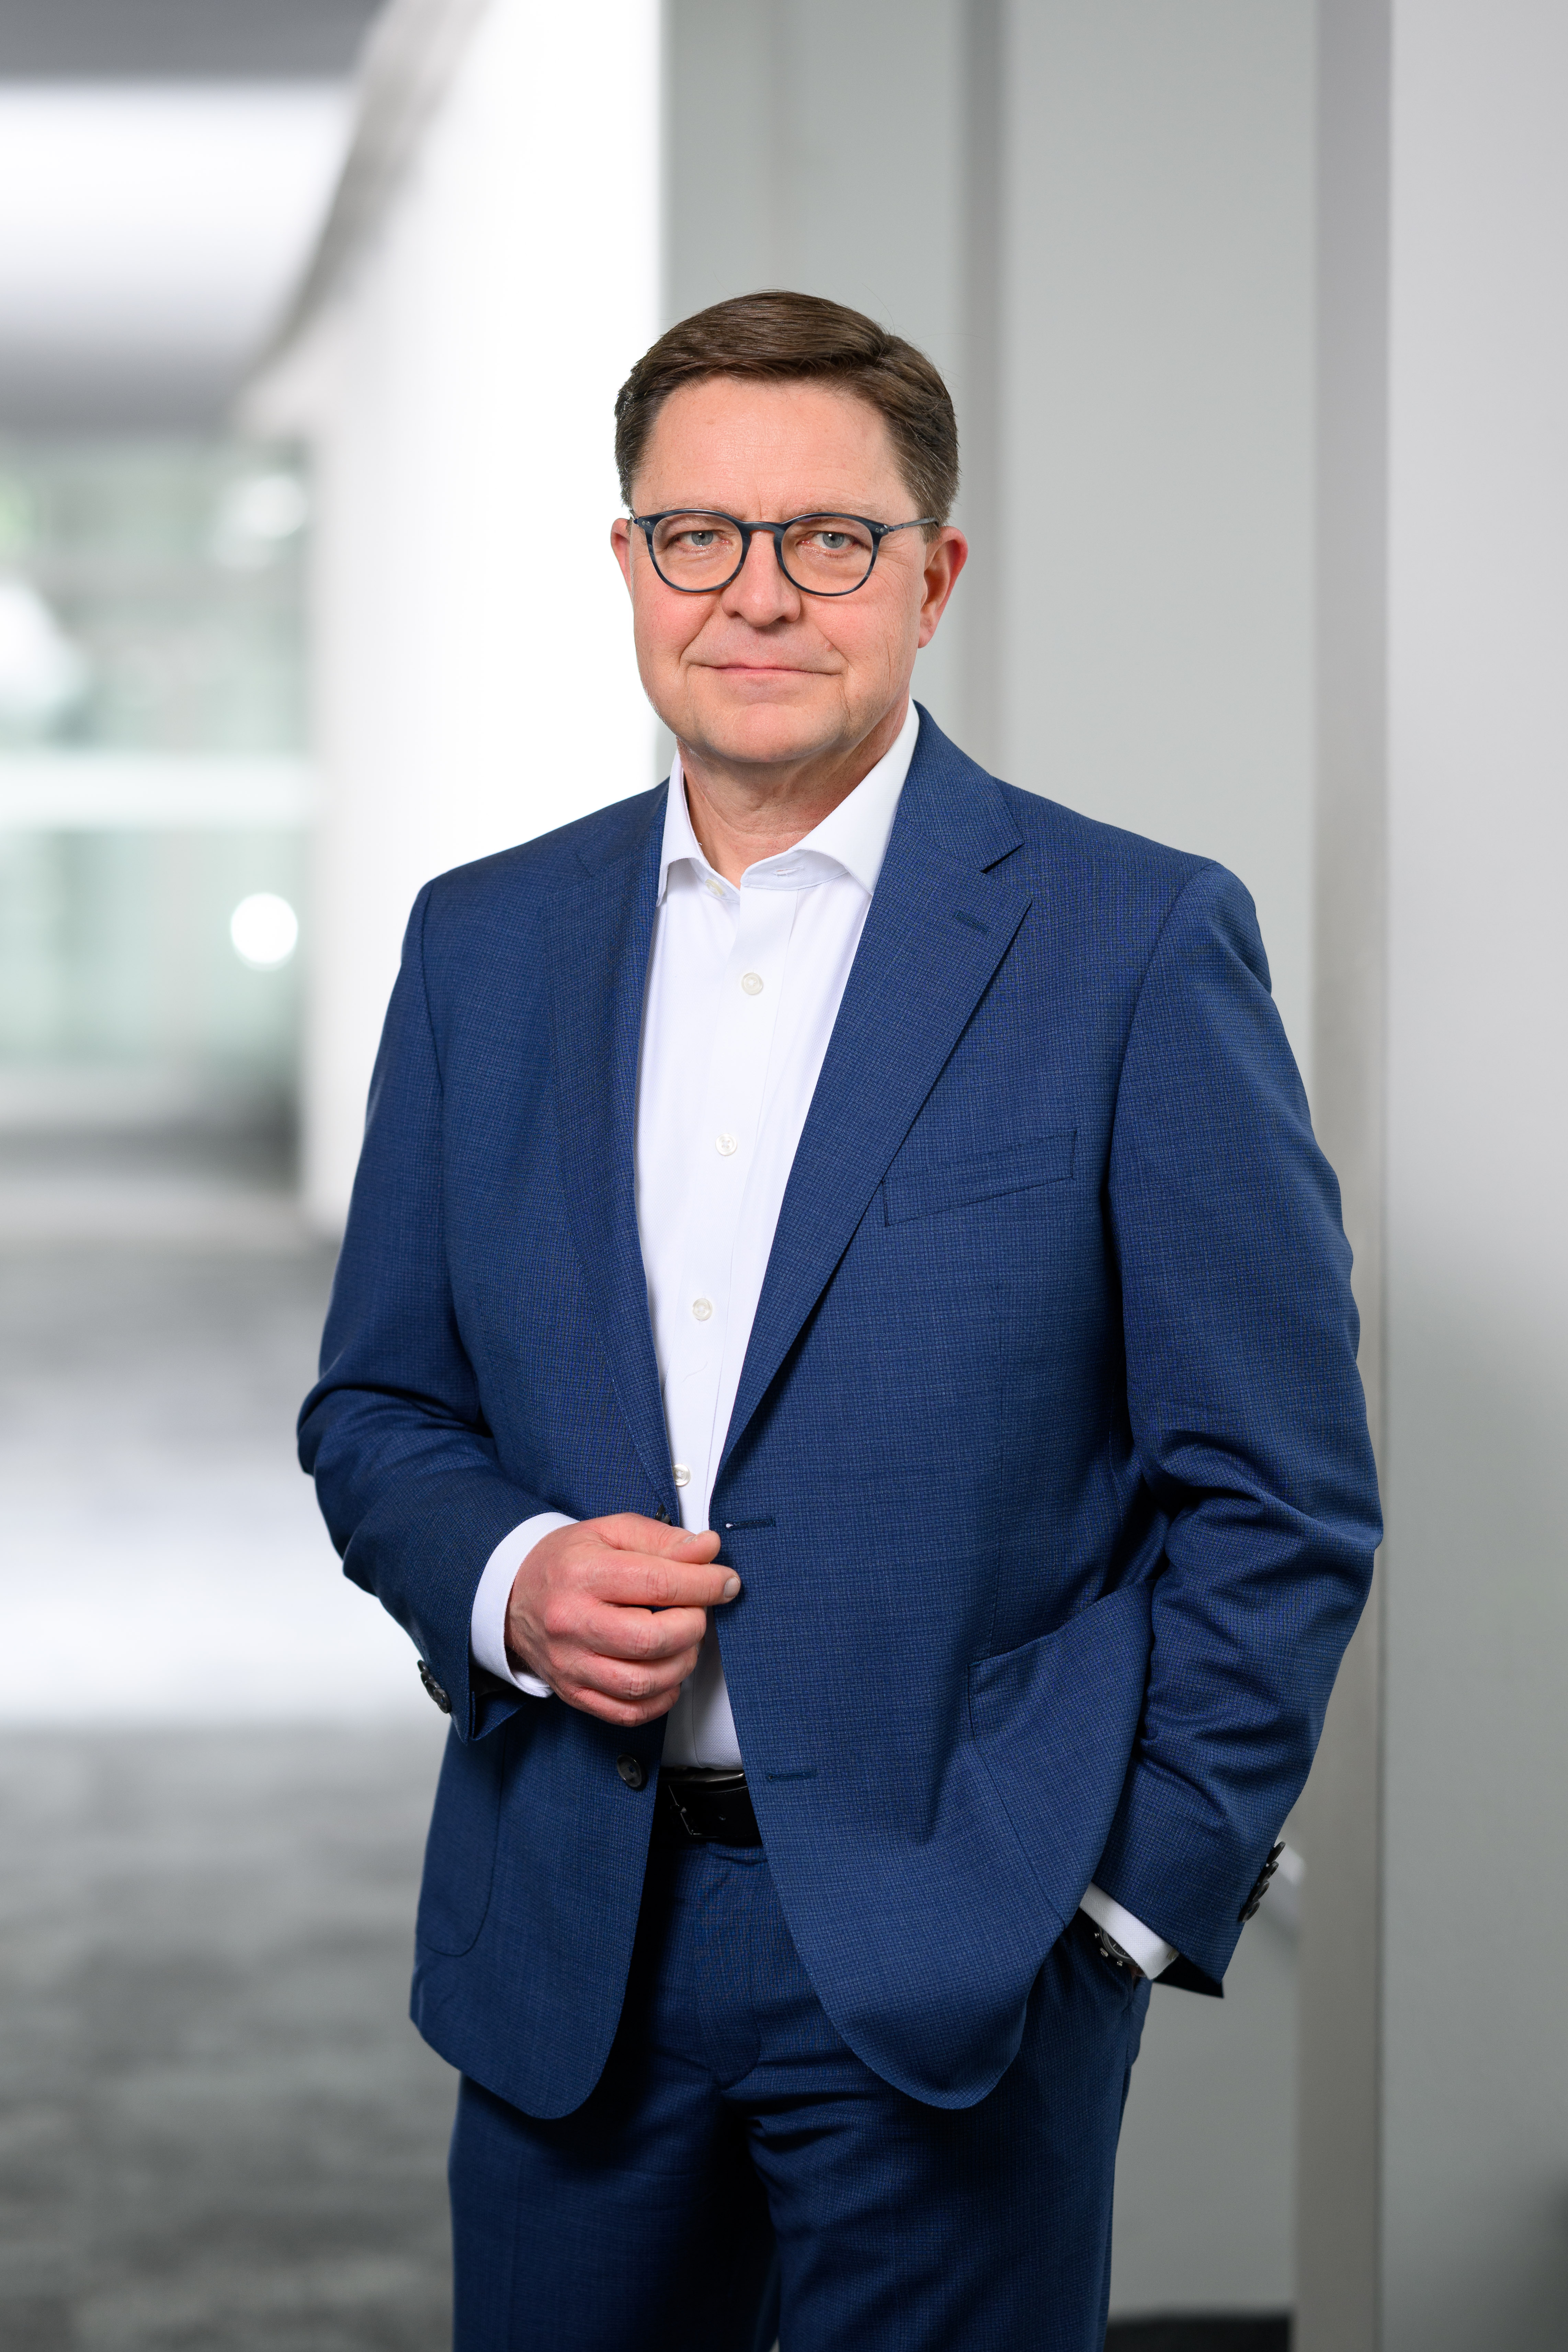 Member of the Bosch board of management and director of industrial relations Stefan Grosch